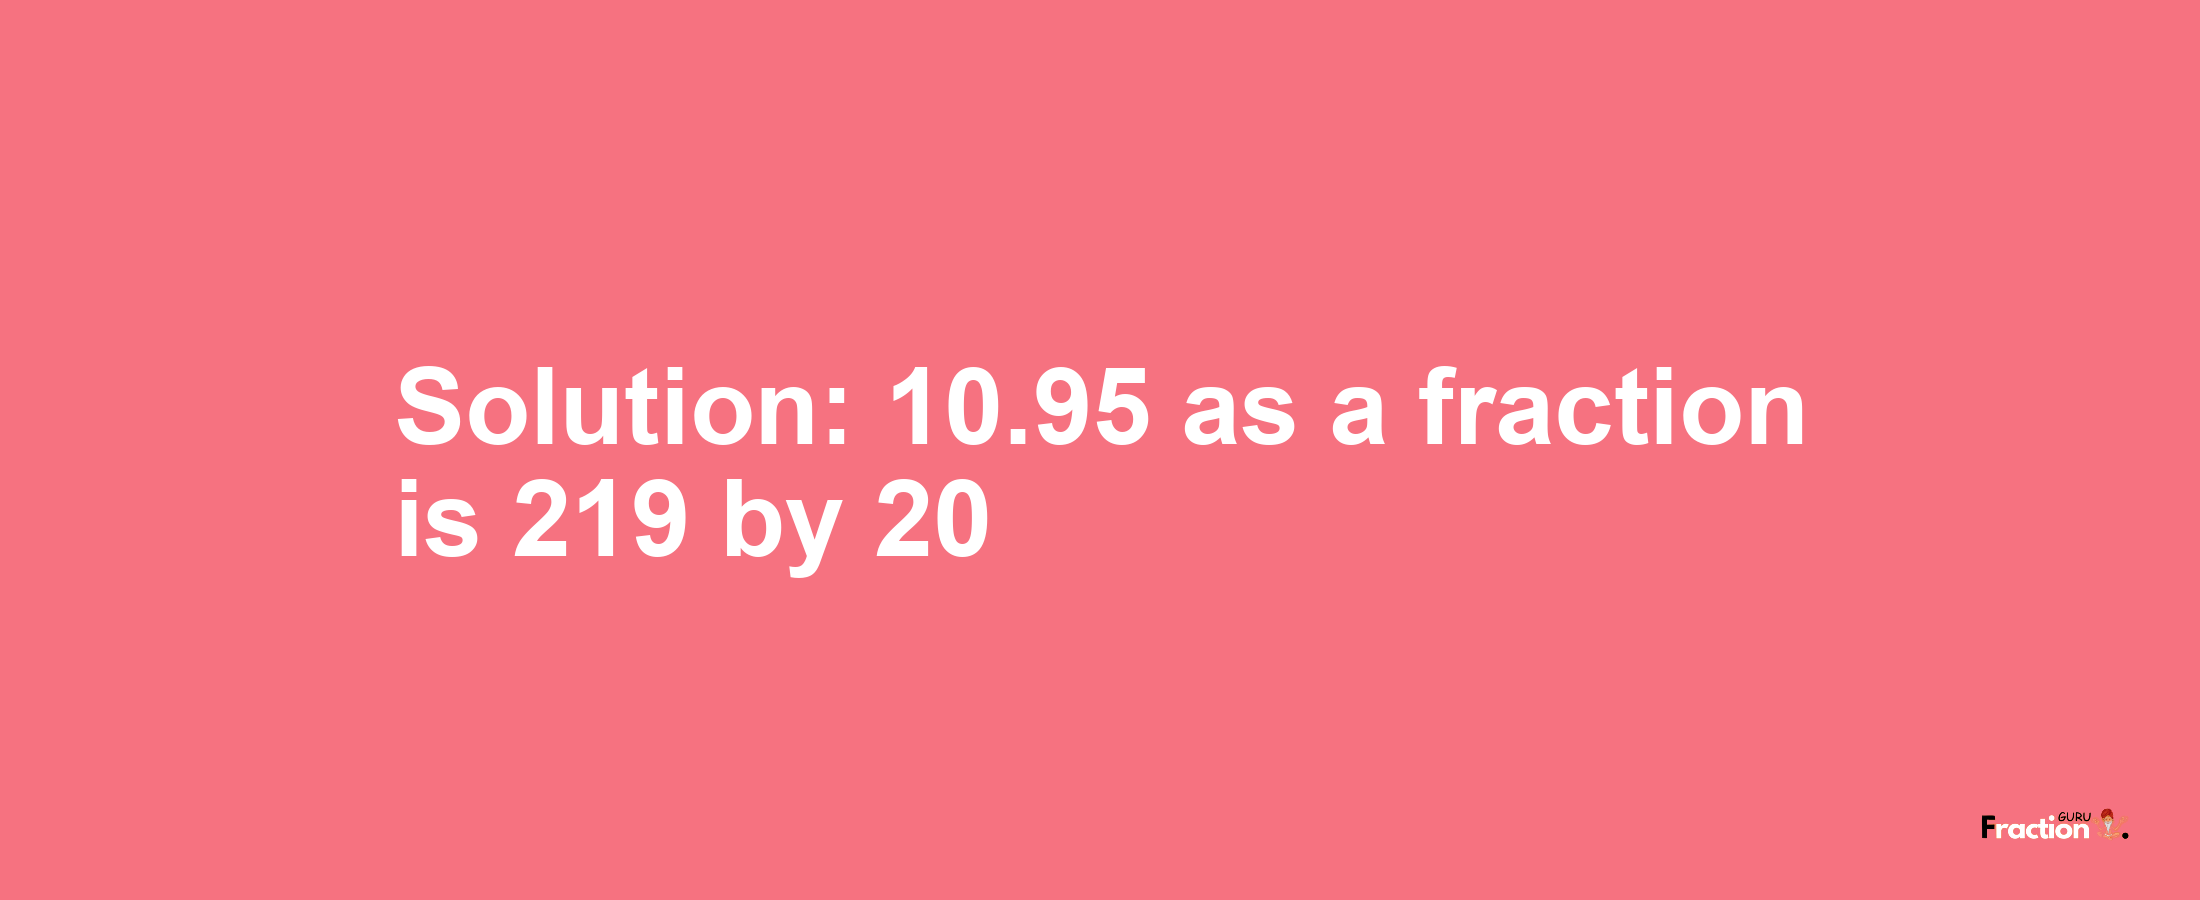 Solution:10.95 as a fraction is 219/20